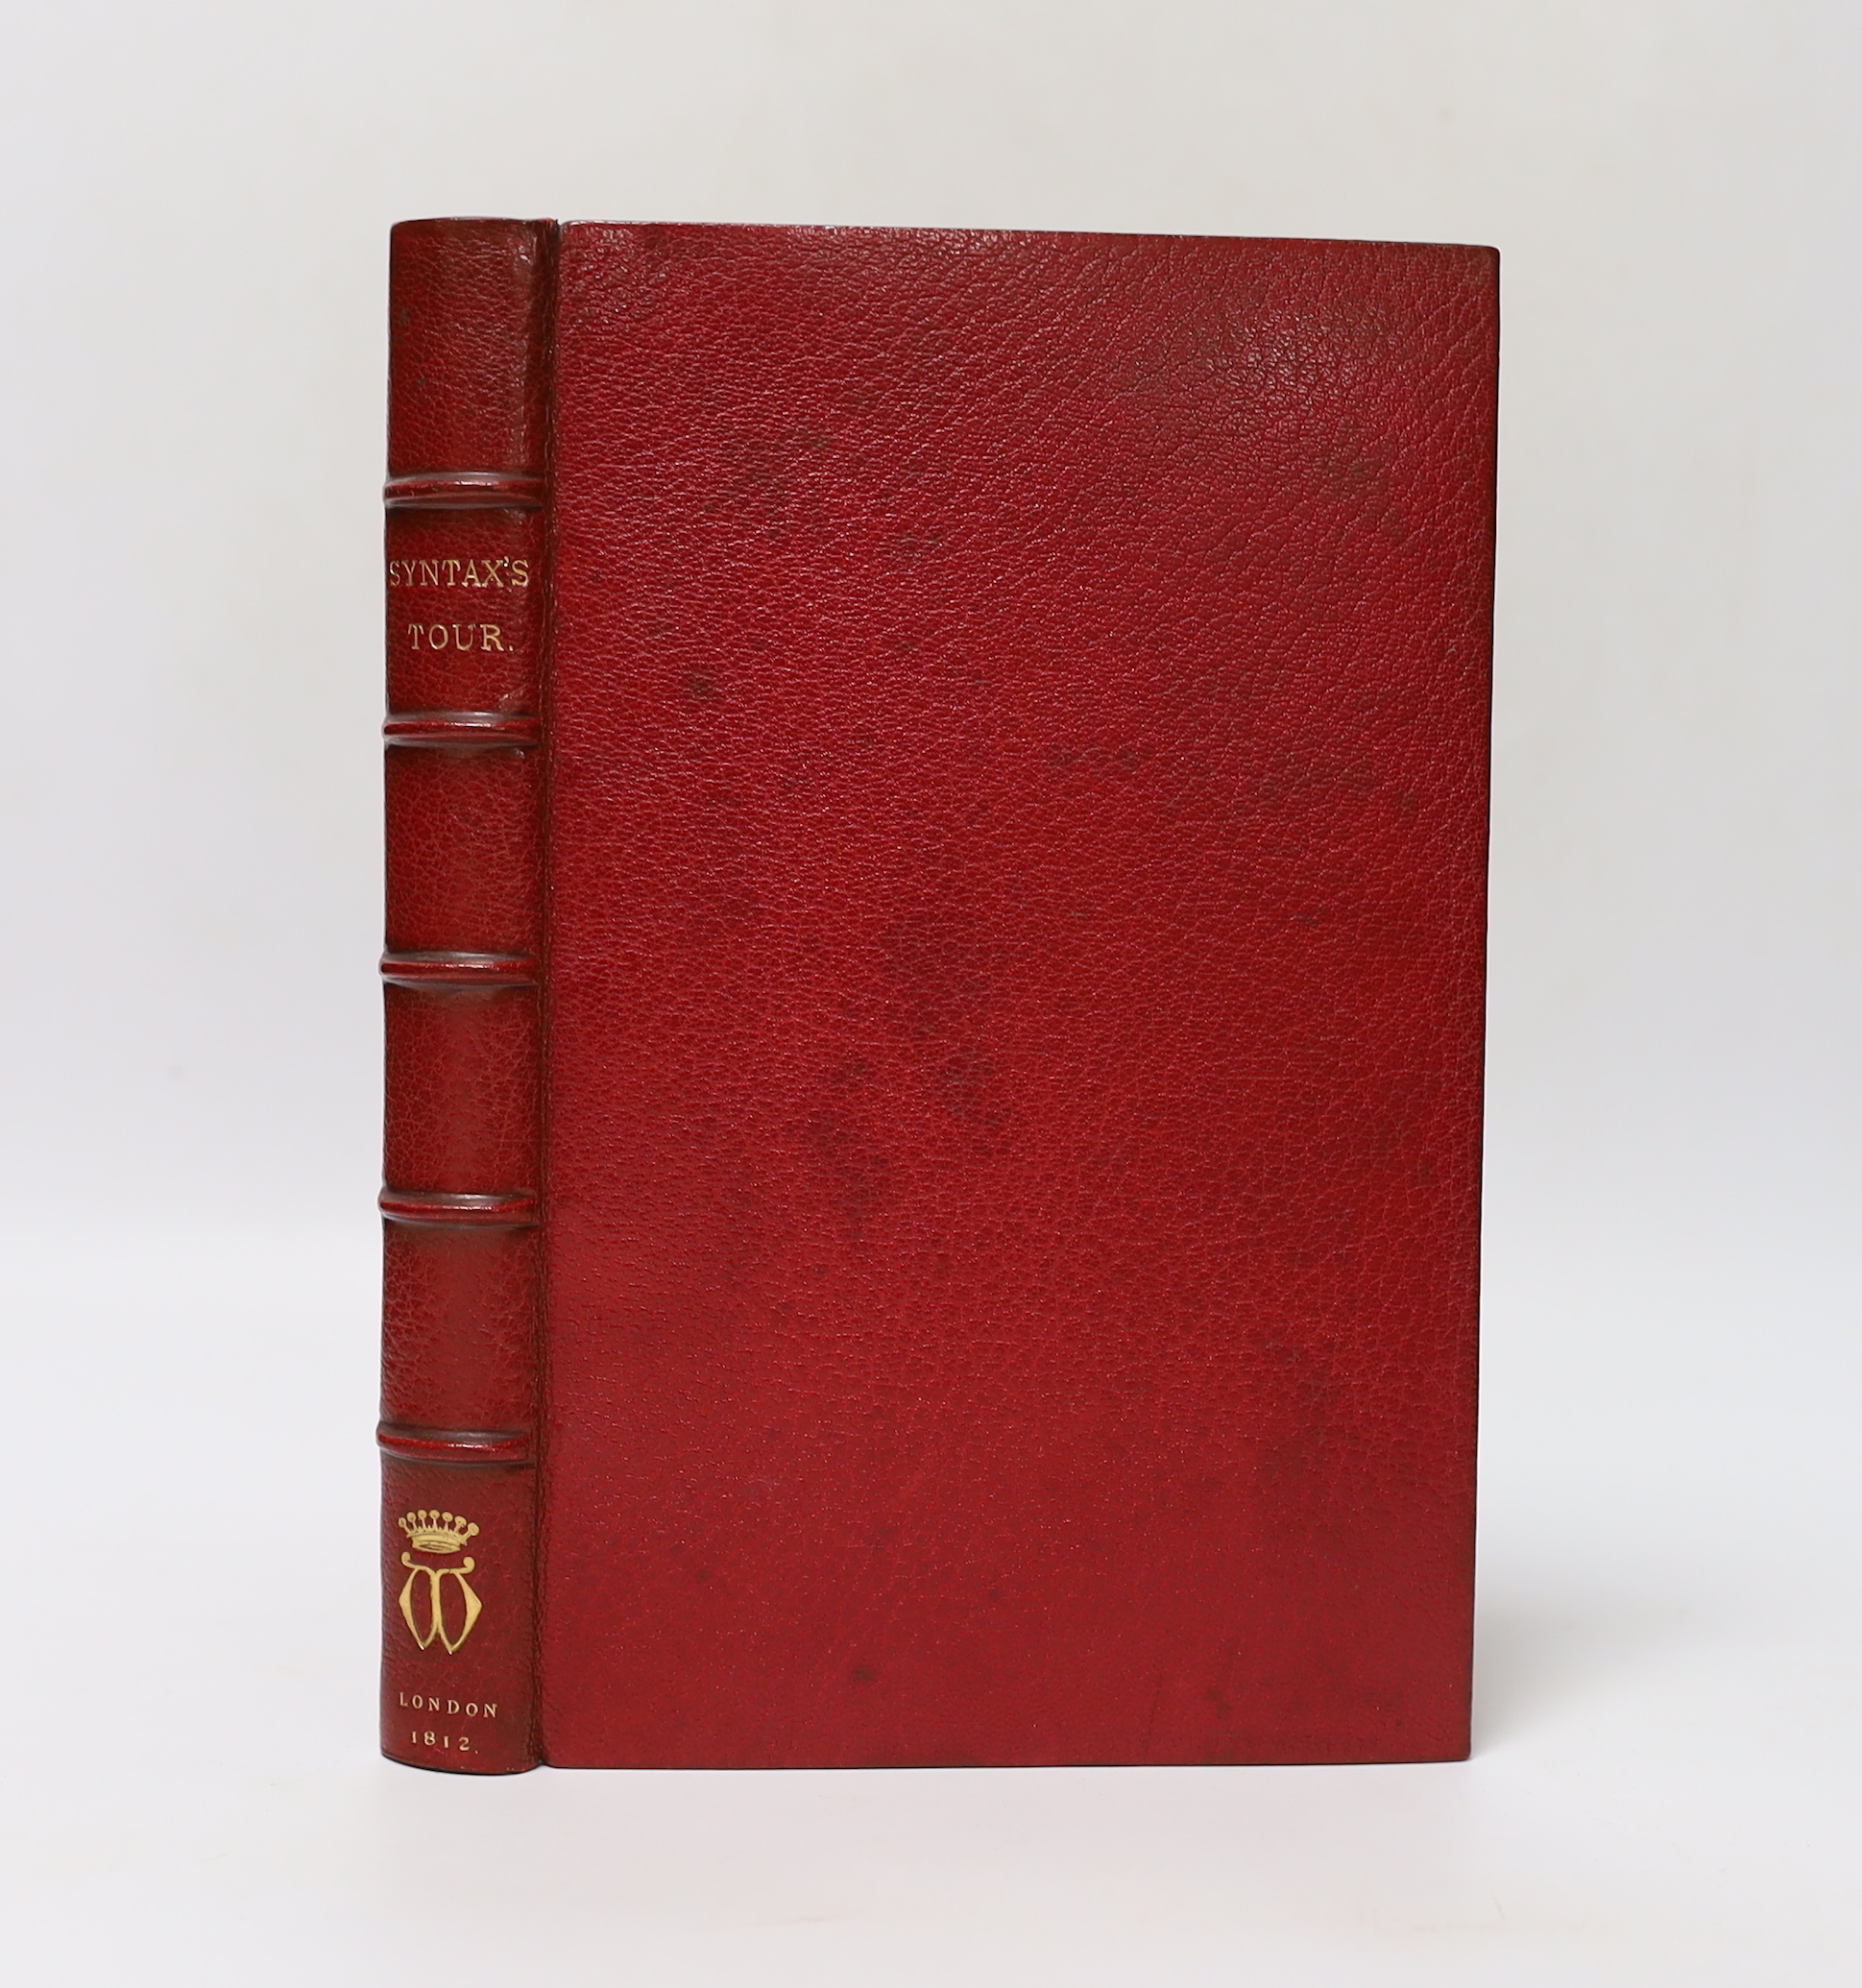 Combe, William - The Tour of Doctor Syntax in Search of the Picturesque. A Poem. 1st edition, 8vo, in later fine red crushed morocco gilt binding by H. Sotheran & Co., London, illustrated by Thomas Rowlandson, with front